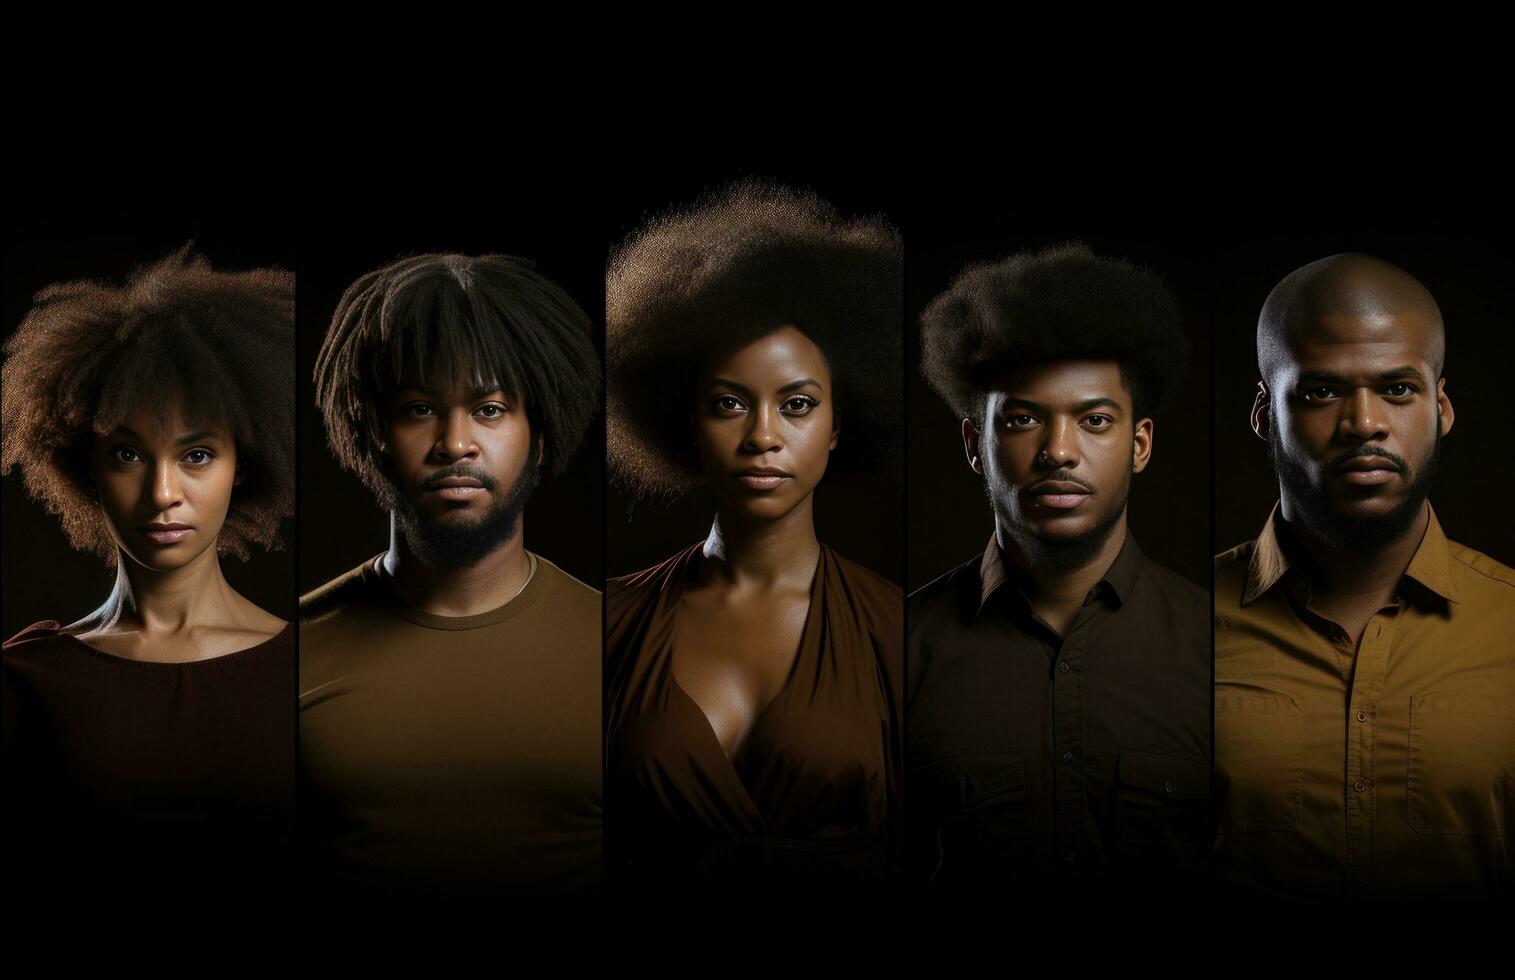 AI generated an image is shown of black people with afros, photo